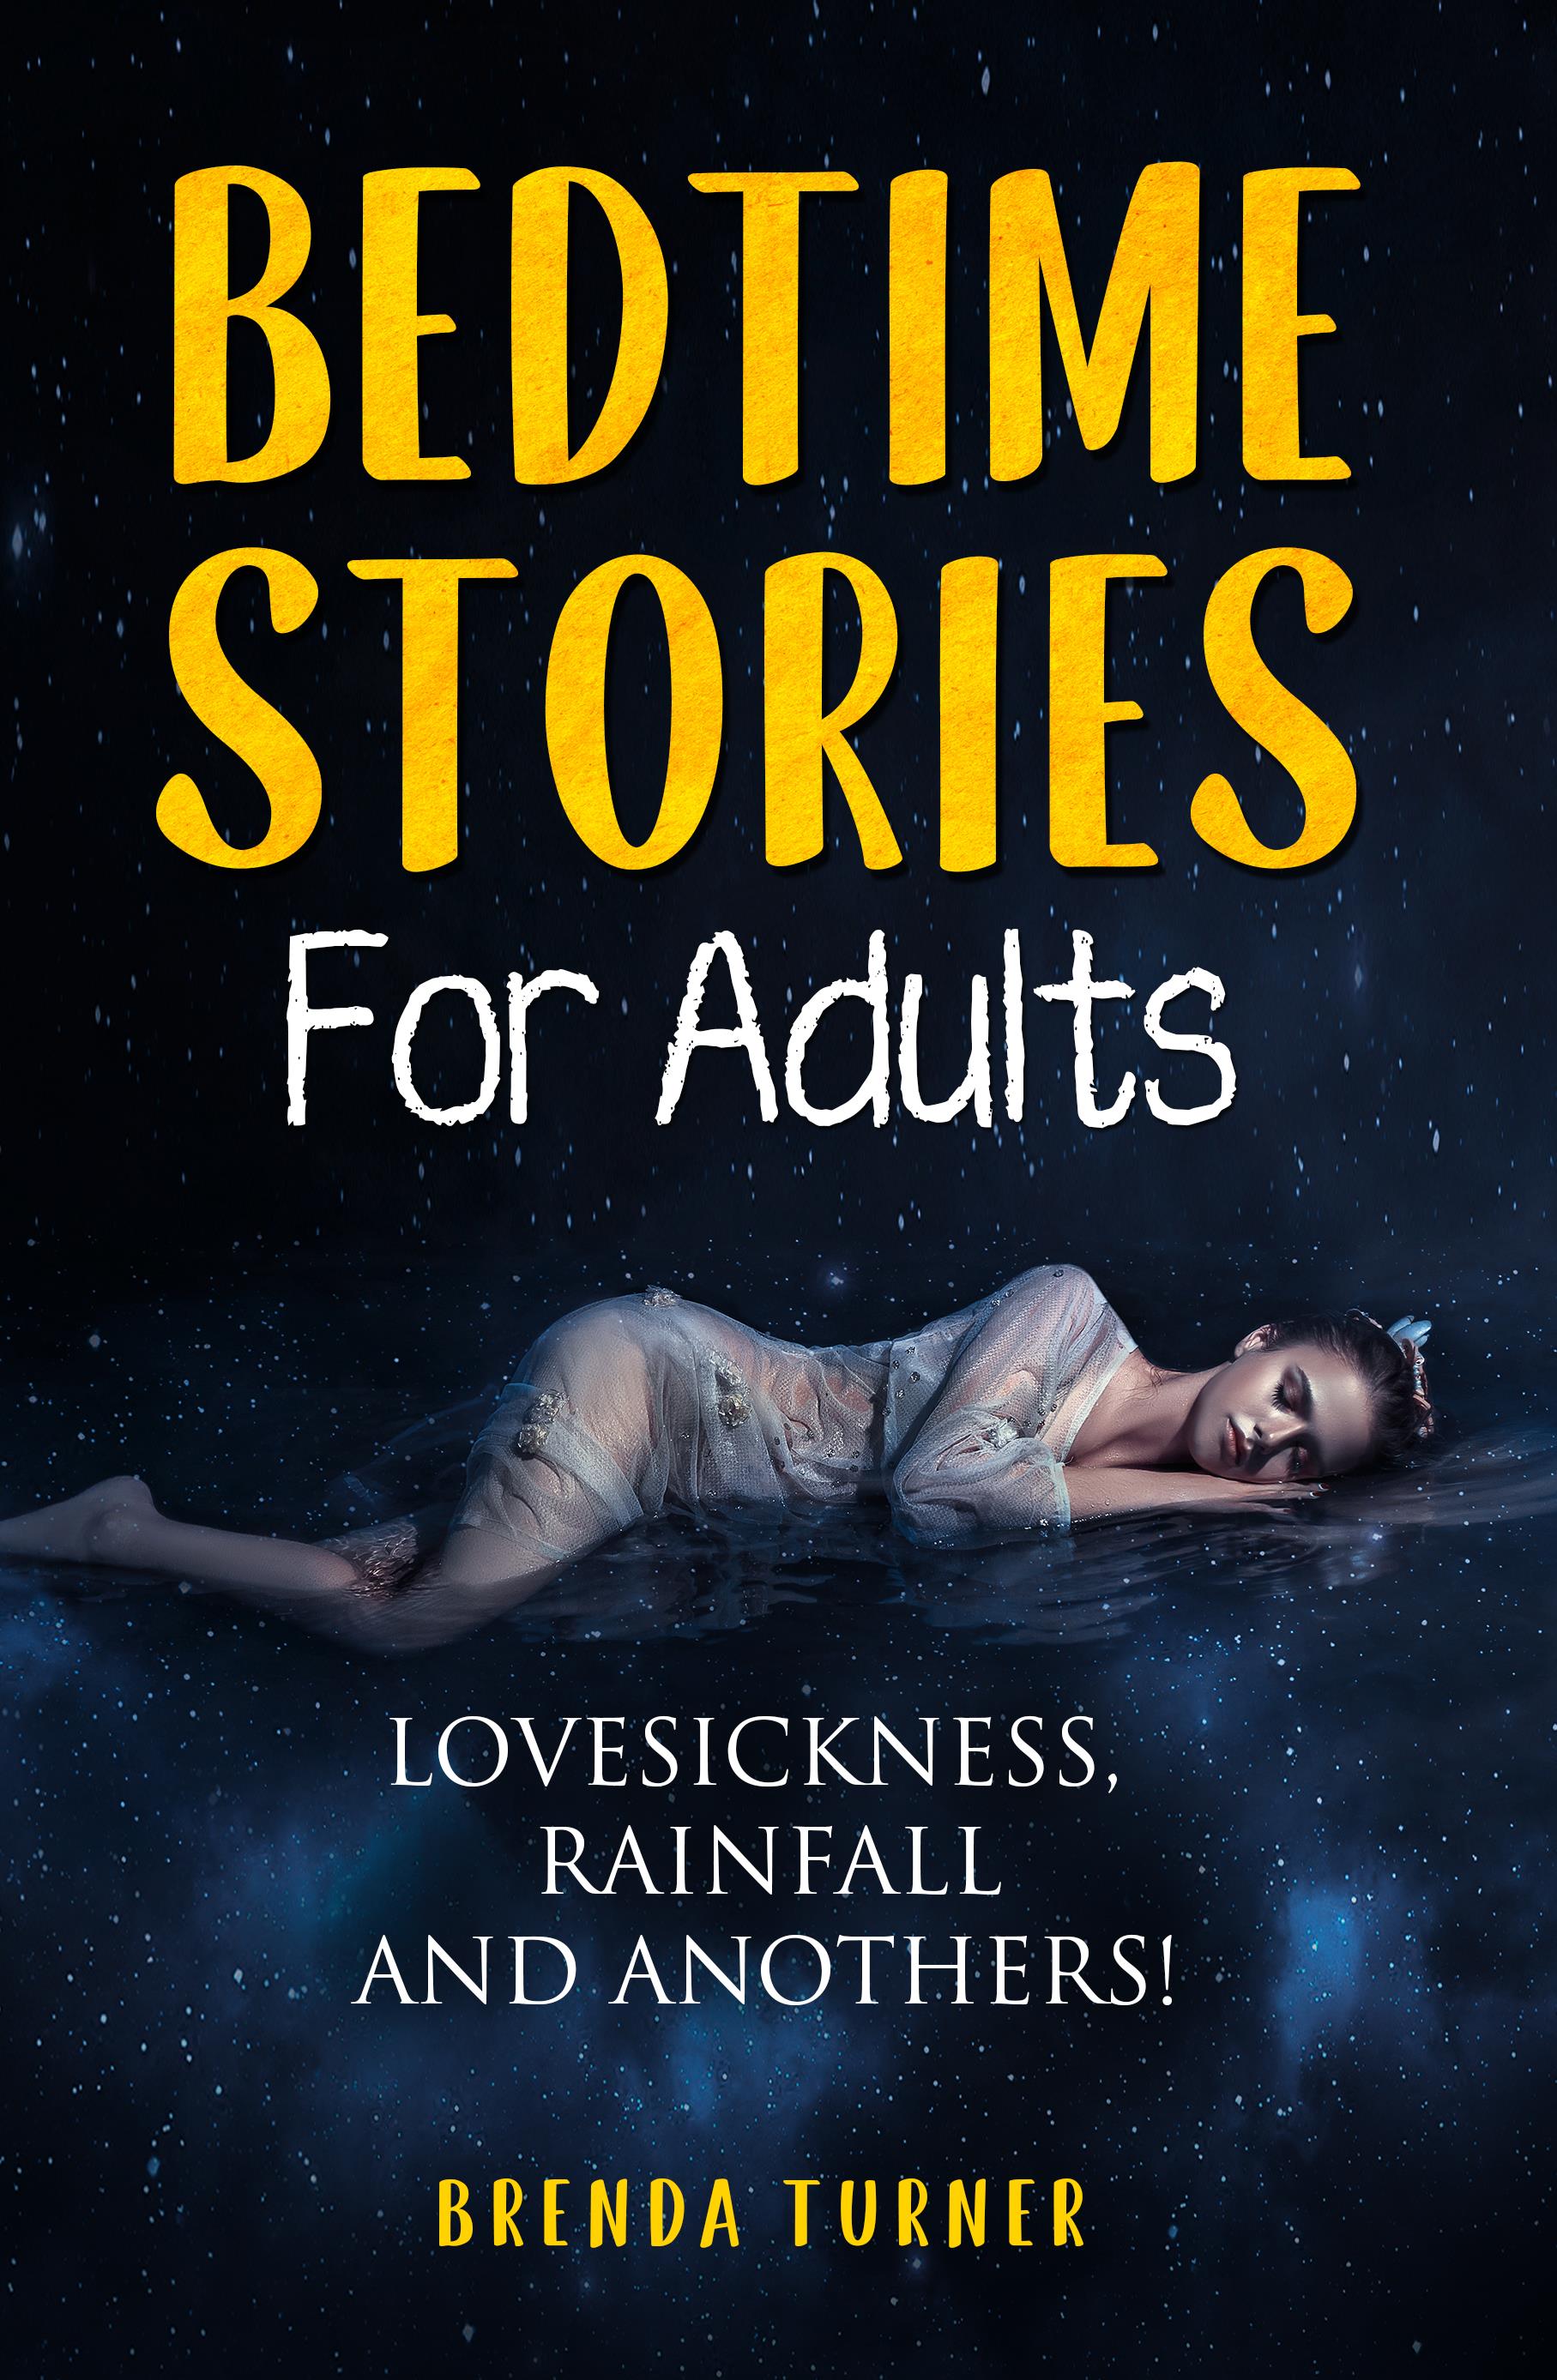 Bedtime stories for adults. Lovesickness , Rainfall And anothers!